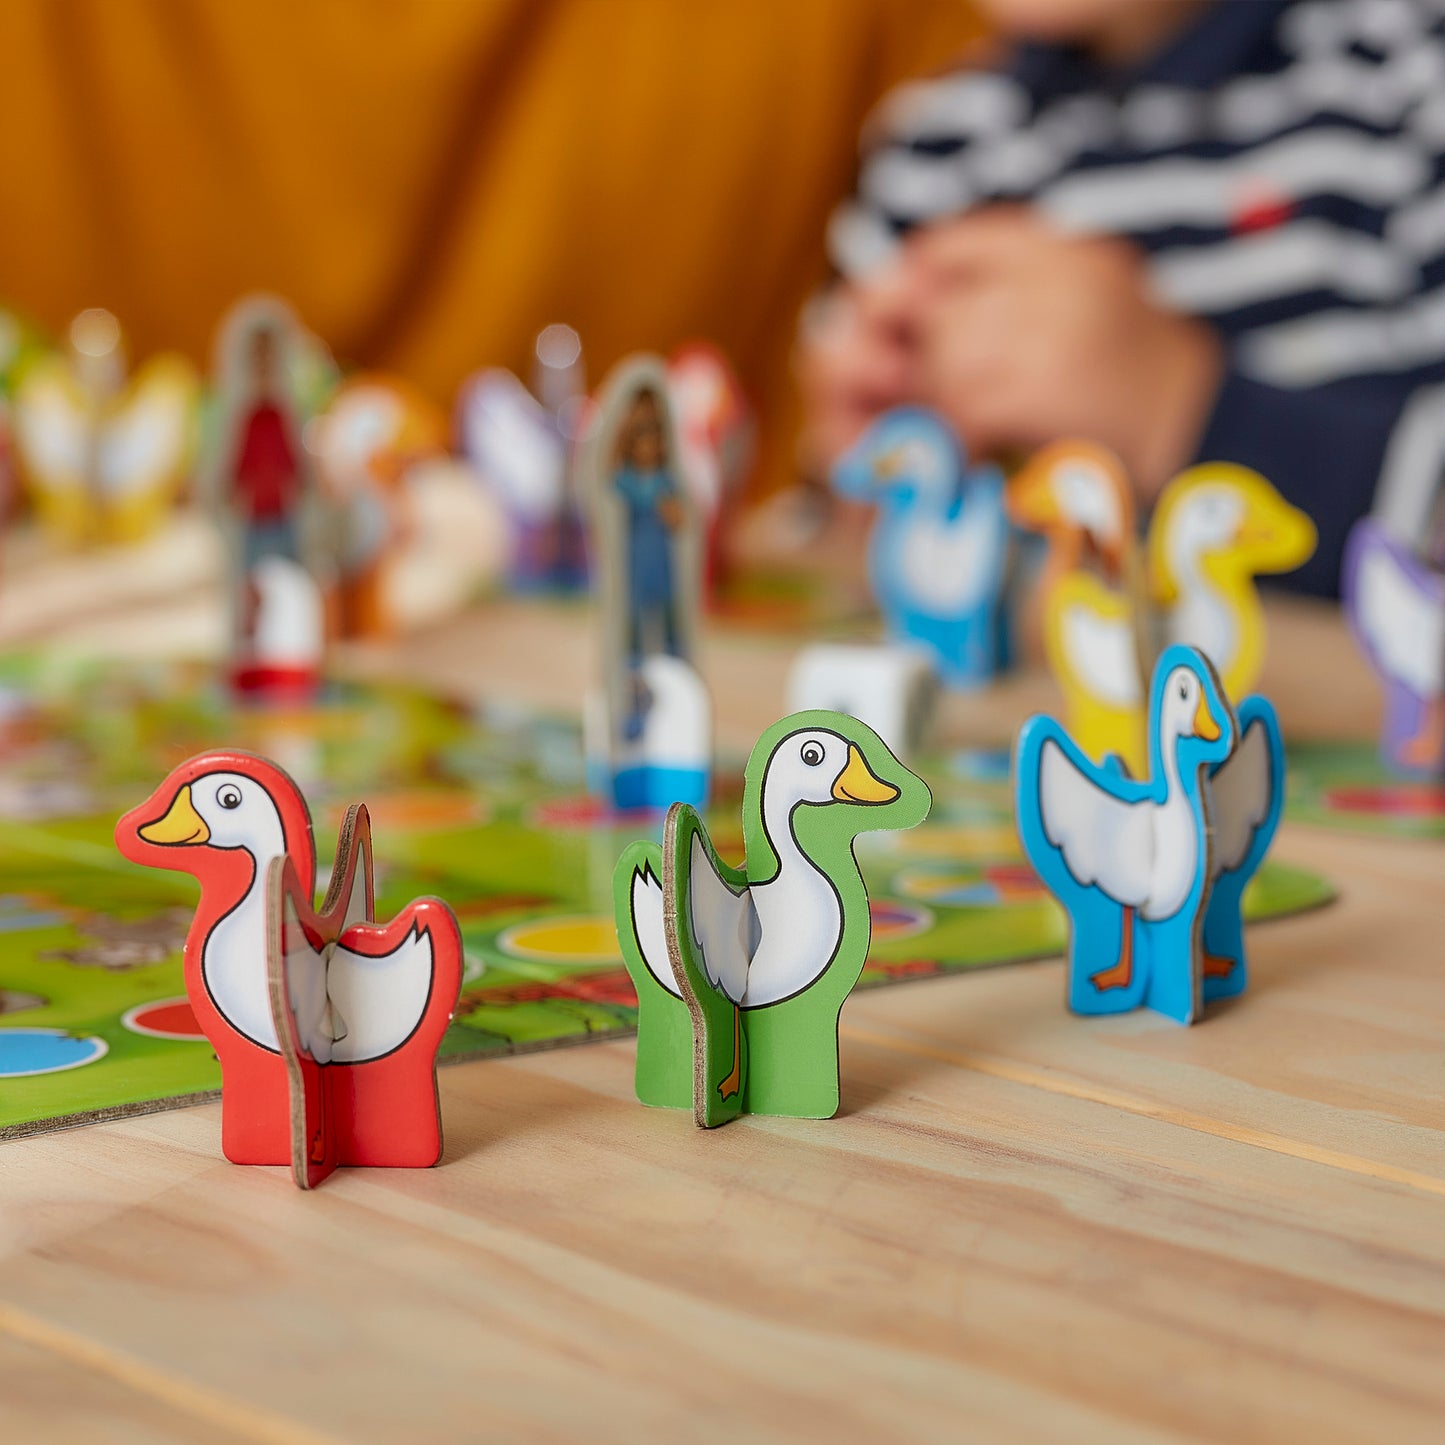 Orchard Toys Goose on the Loose! Game Colour Matching Game